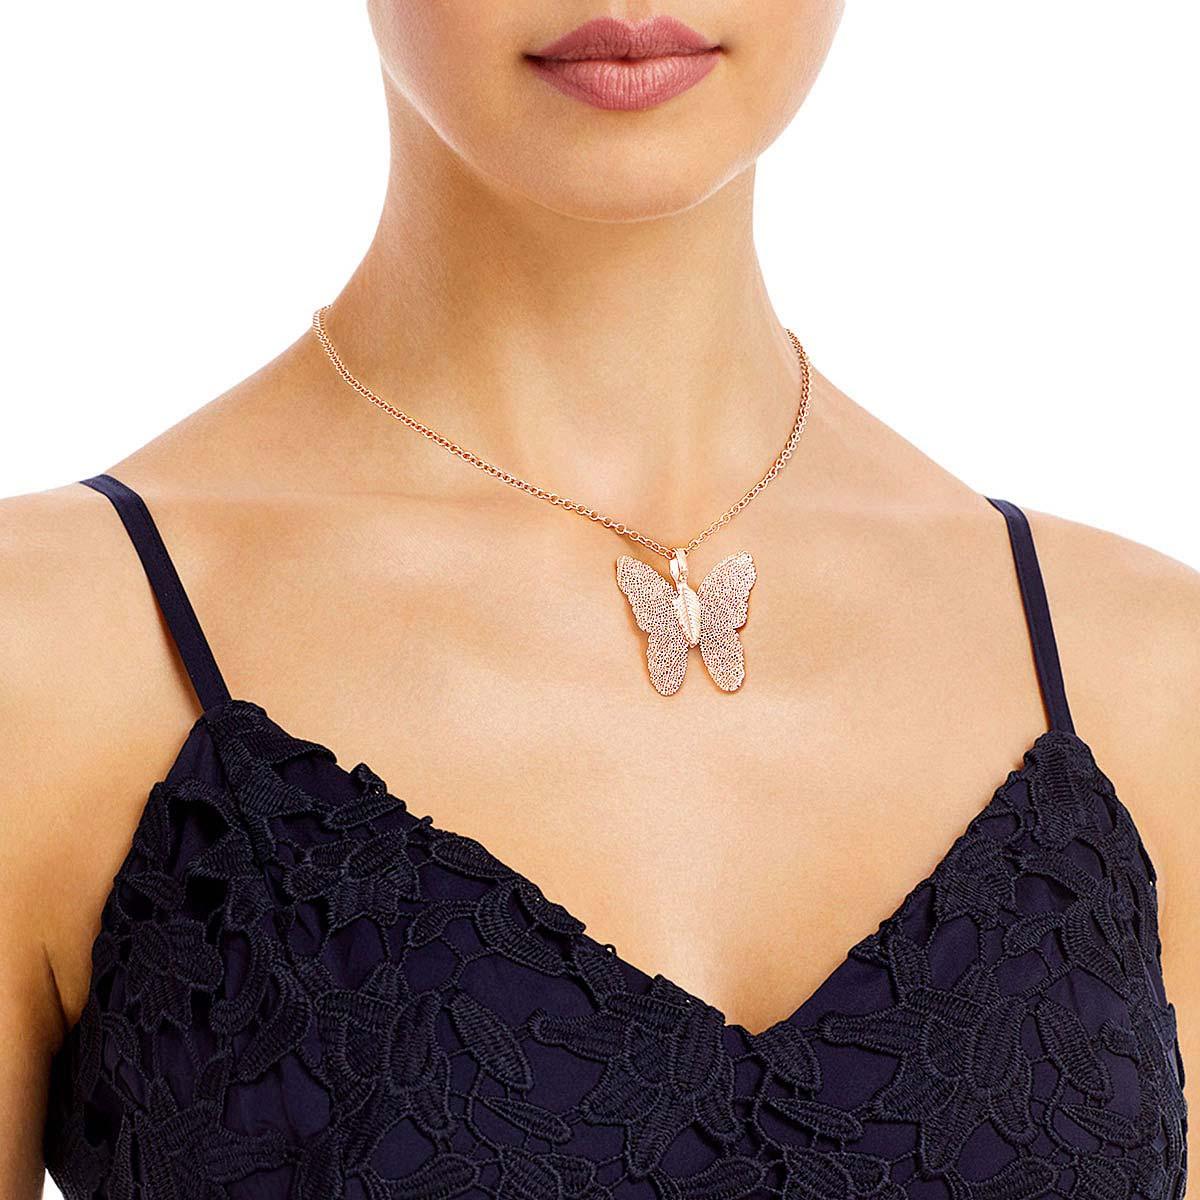 Get your wings with our Rose Gold-tone Butterfly Necklace - Shop now!